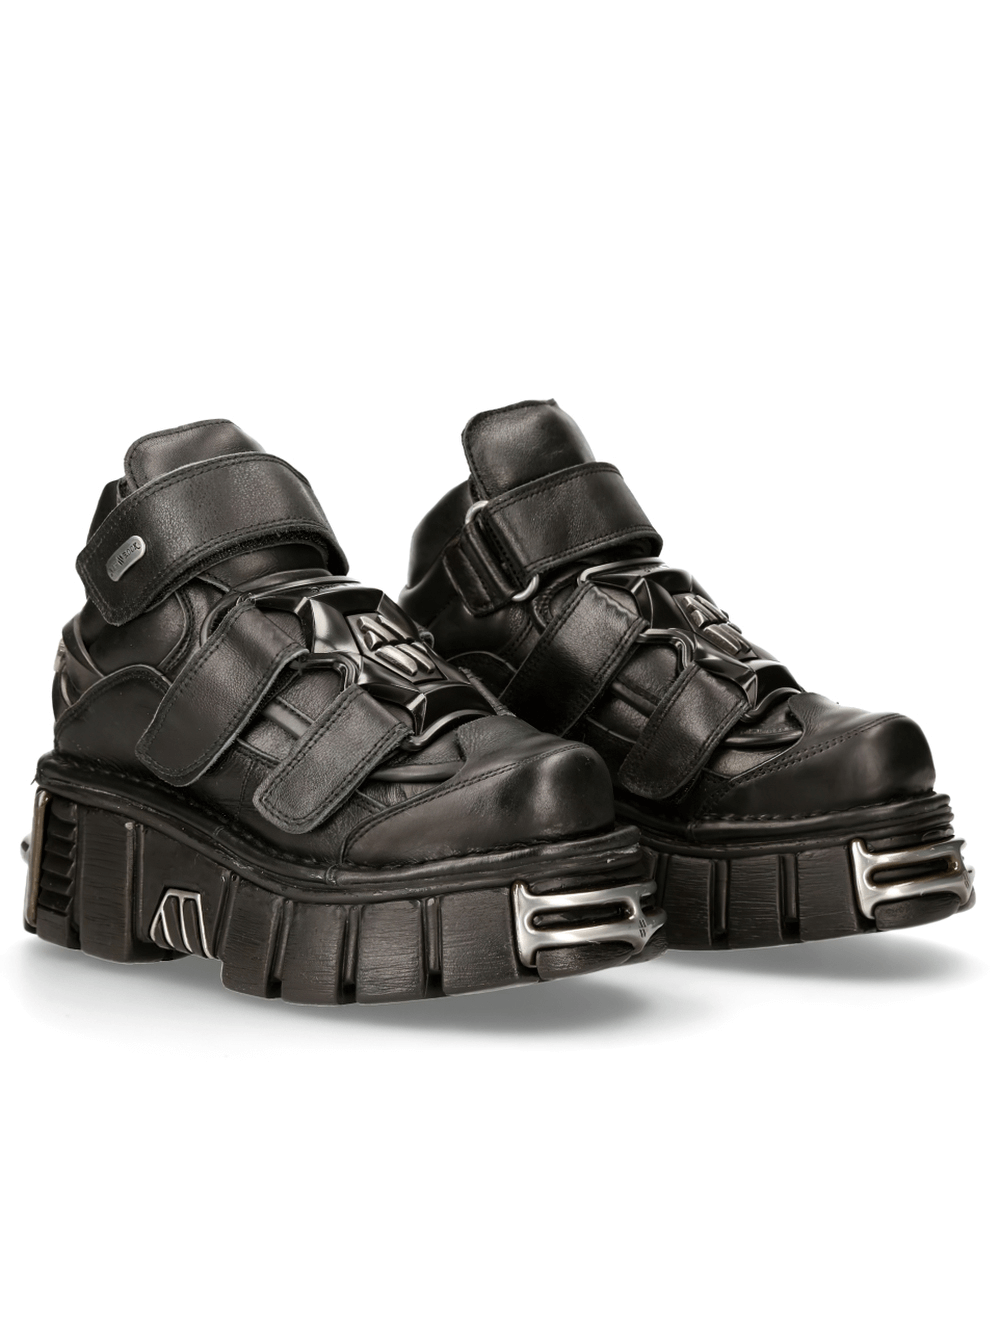 NEW ROCK Goth Ankle Boots with Metallic Accents and Velcros